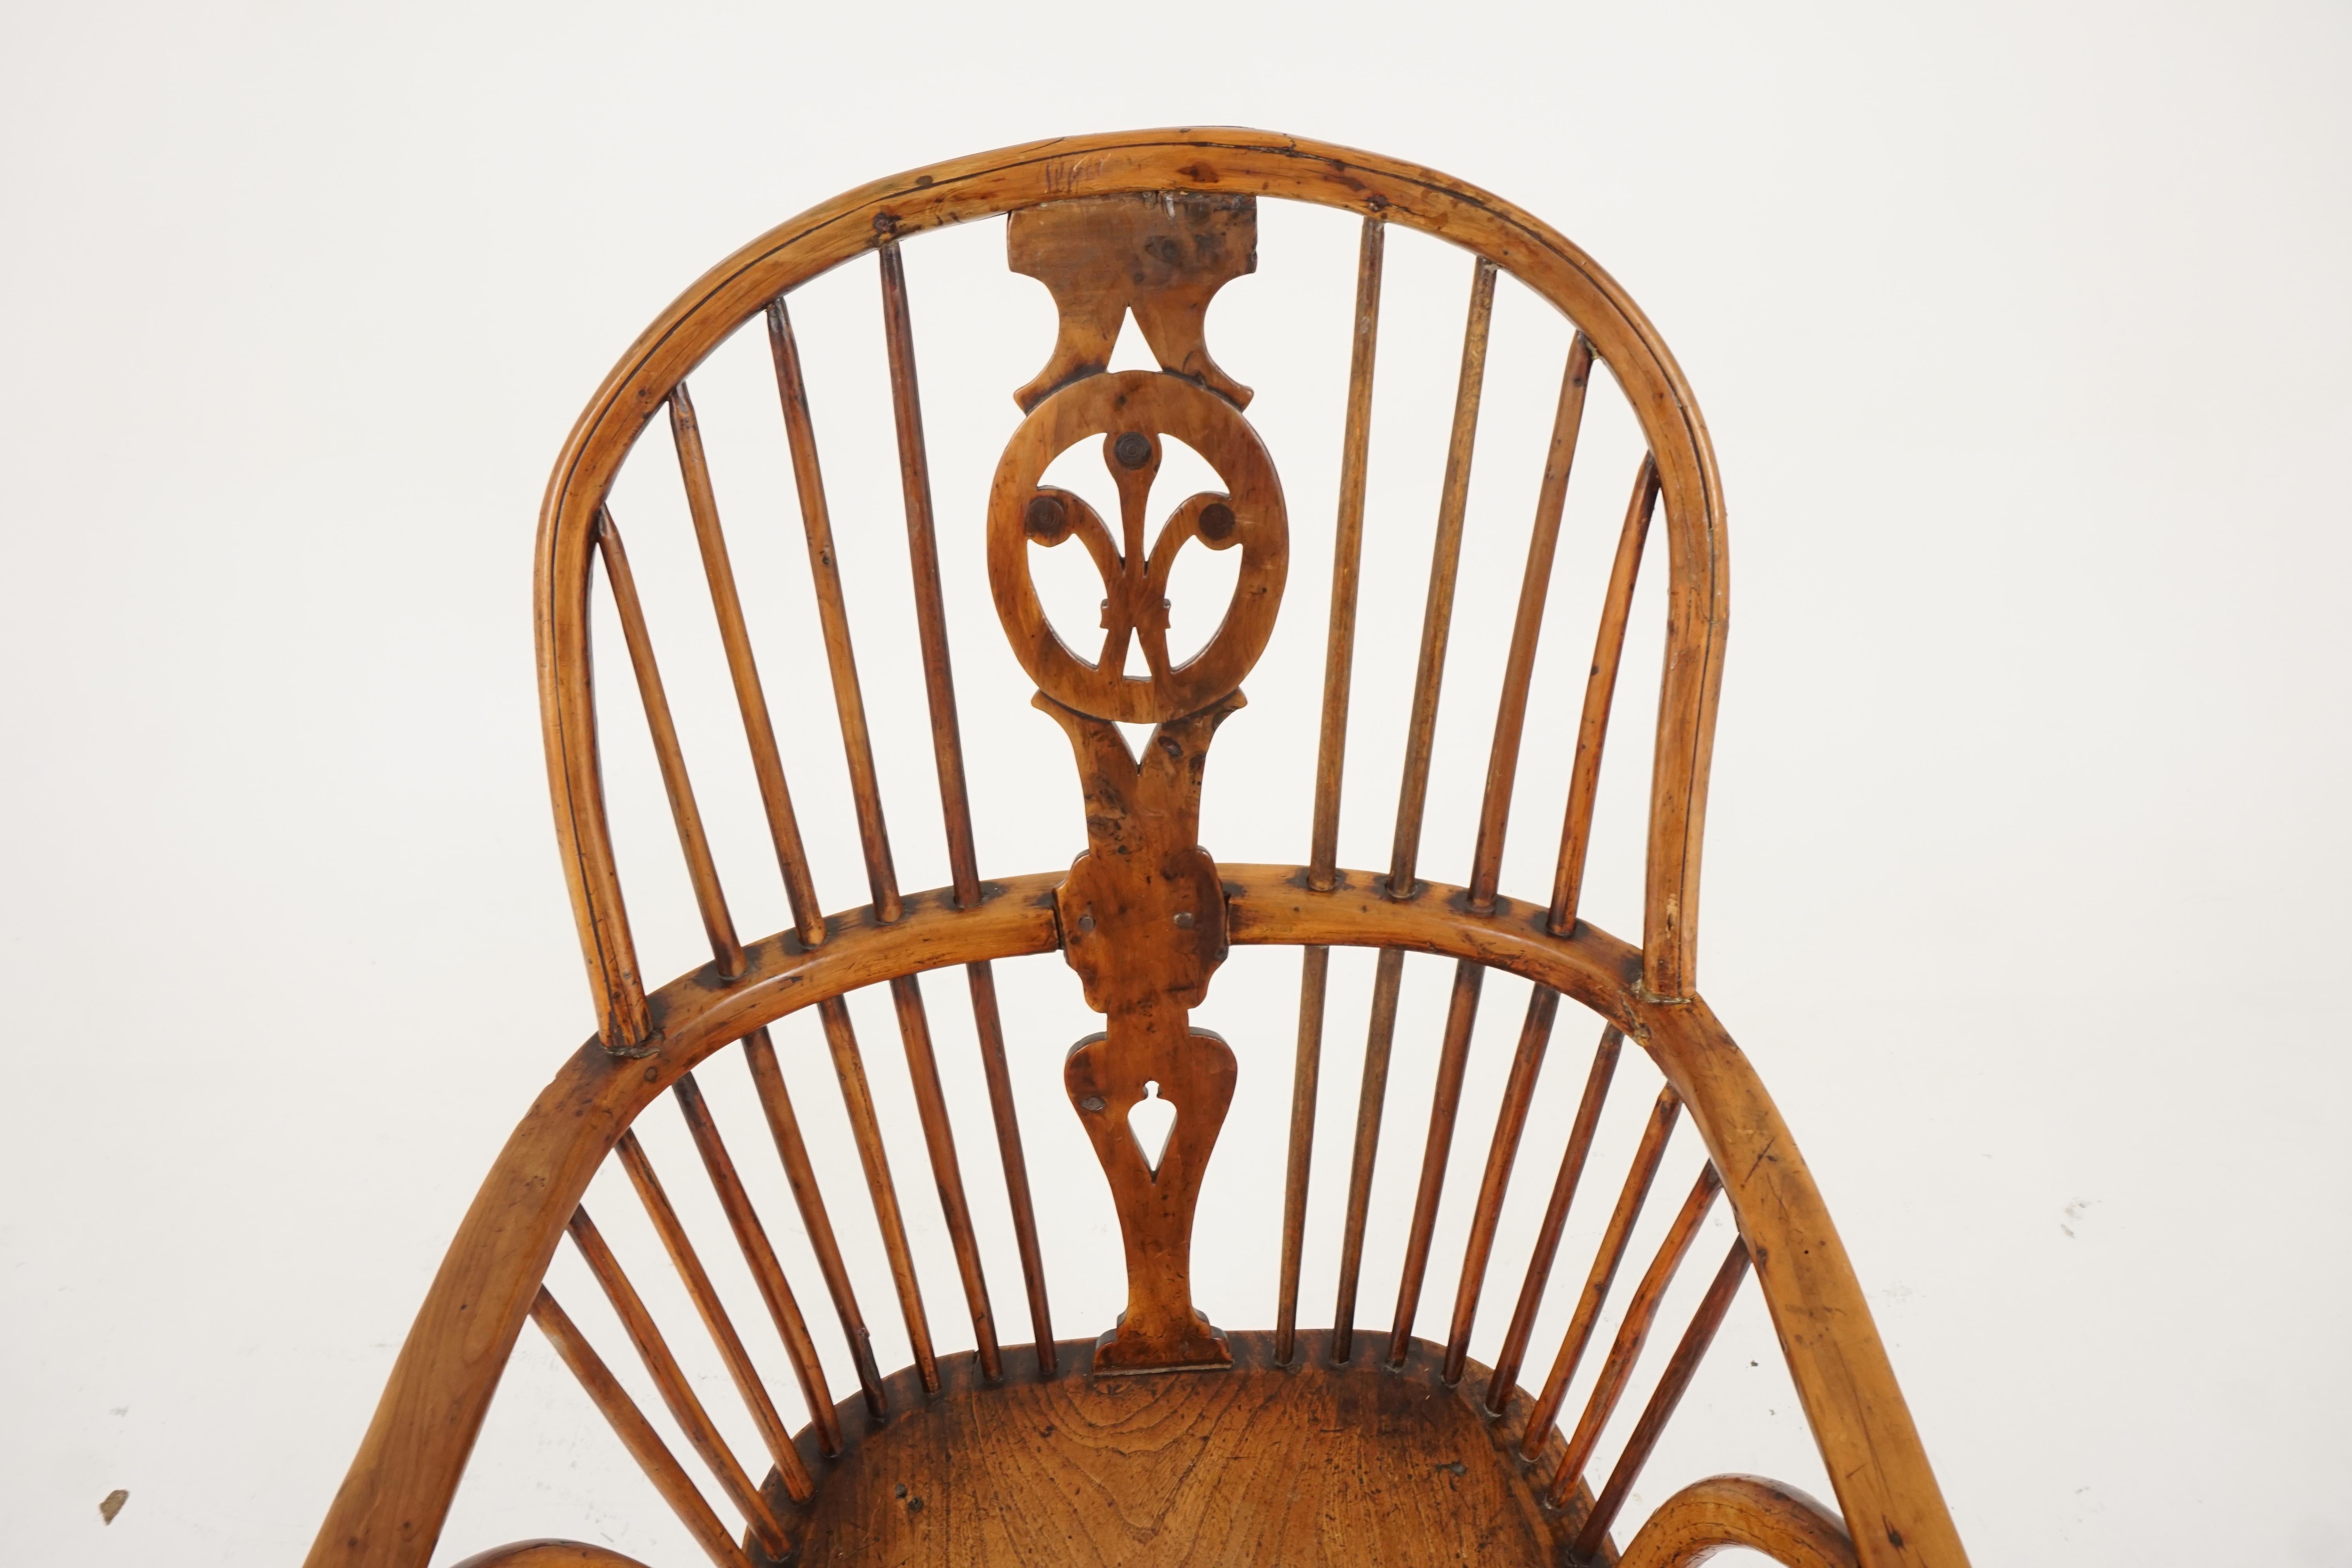 Hand-Crafted Antique Elm Armchair, Victorian, Bow Back Windsor Chair, Scotland 1820, B2280